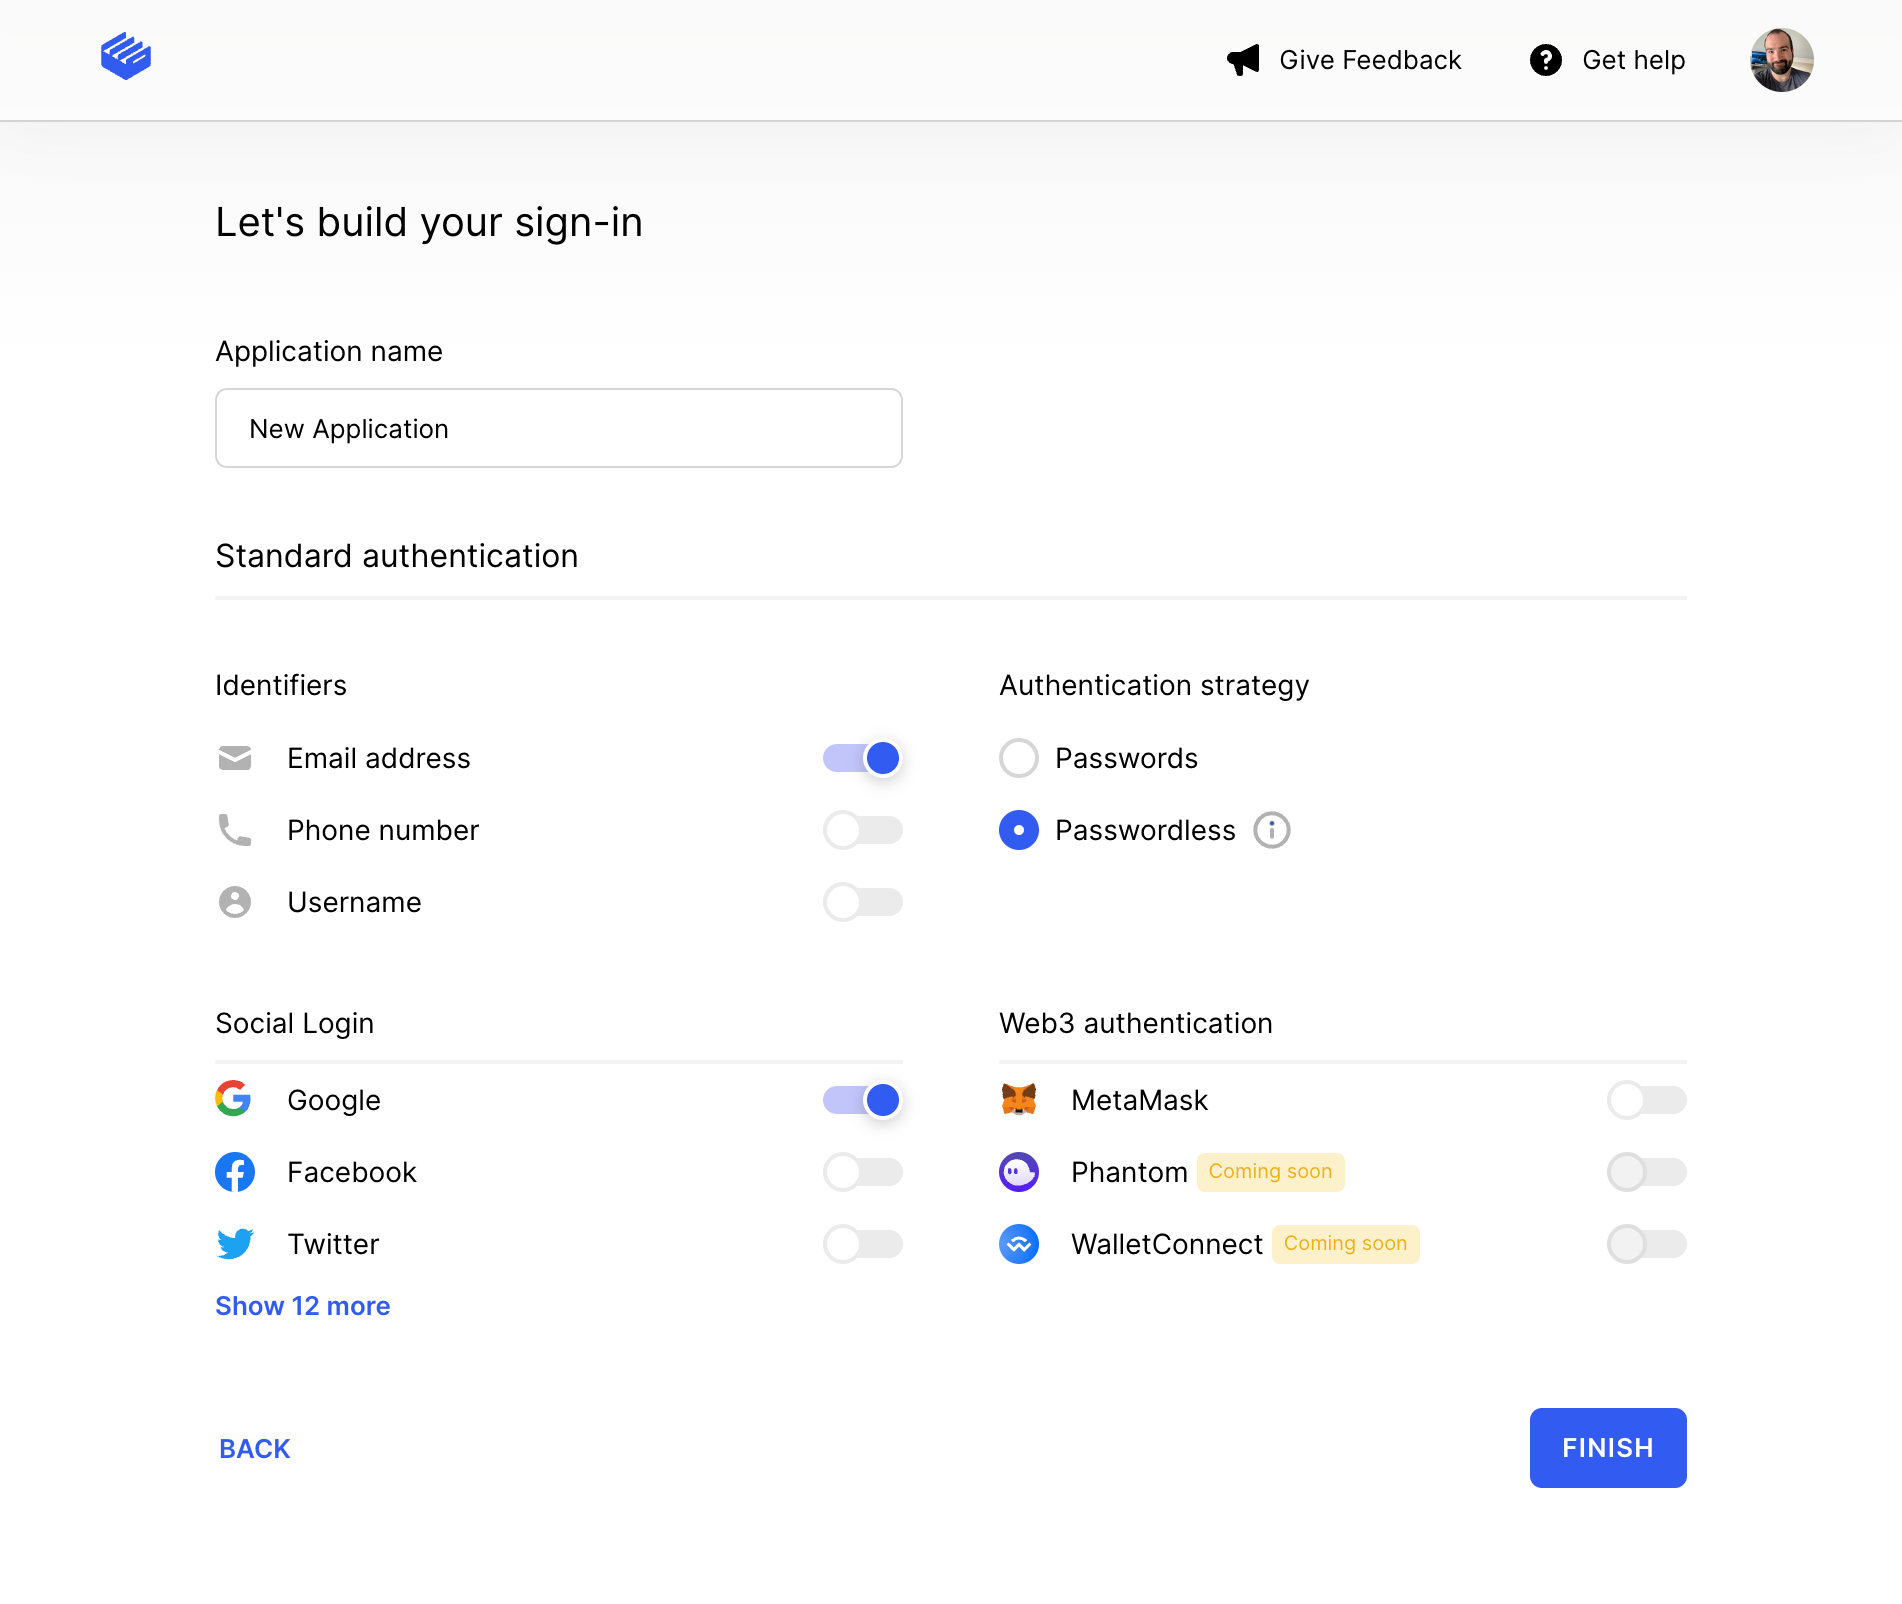 Sign-up screen displaying configurable options